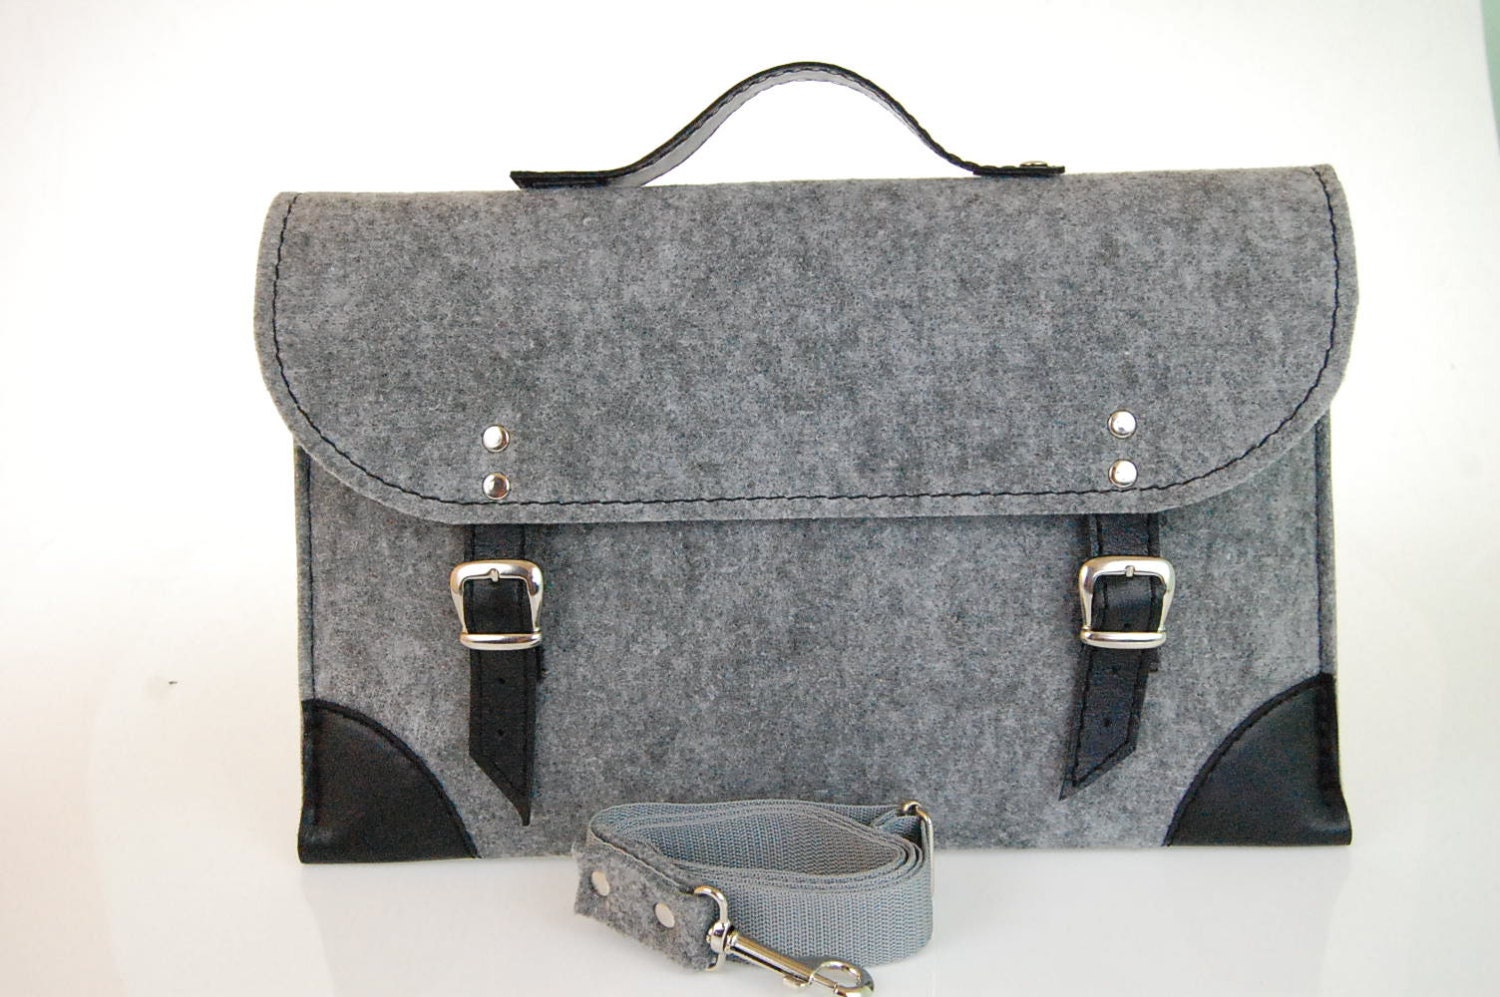 NEW lower price 30% OFF Felt Laptop bag 15 inch with pocket